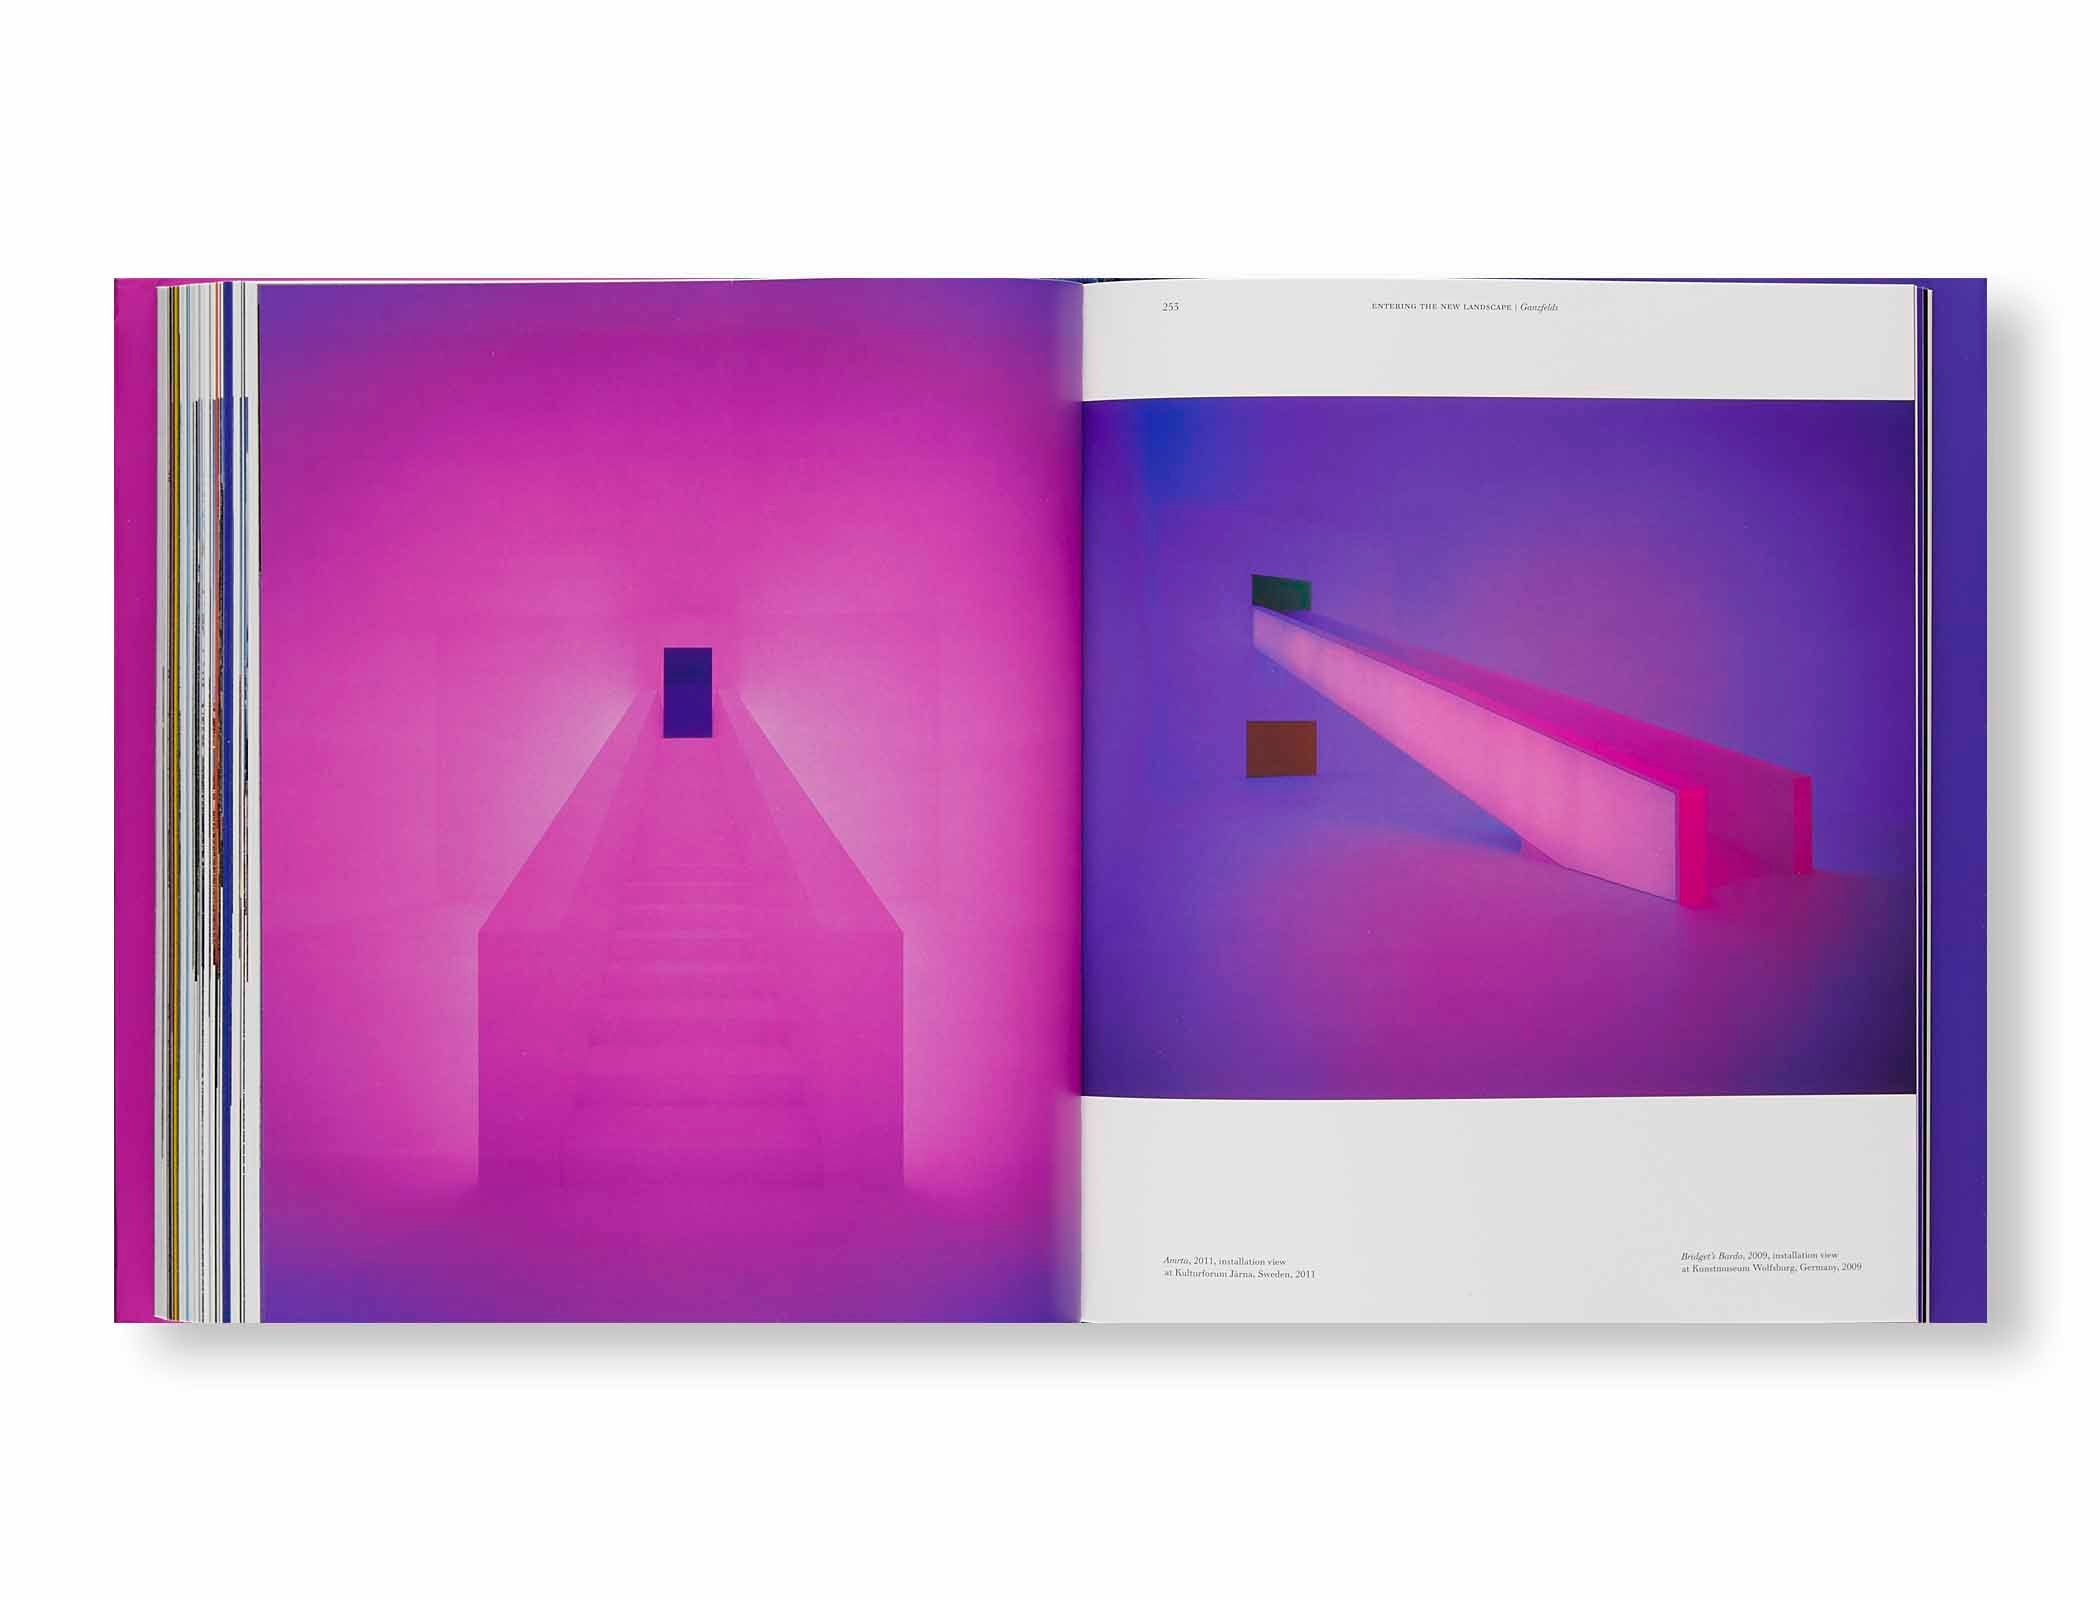 A RETROSPECTIVE by James Turrell